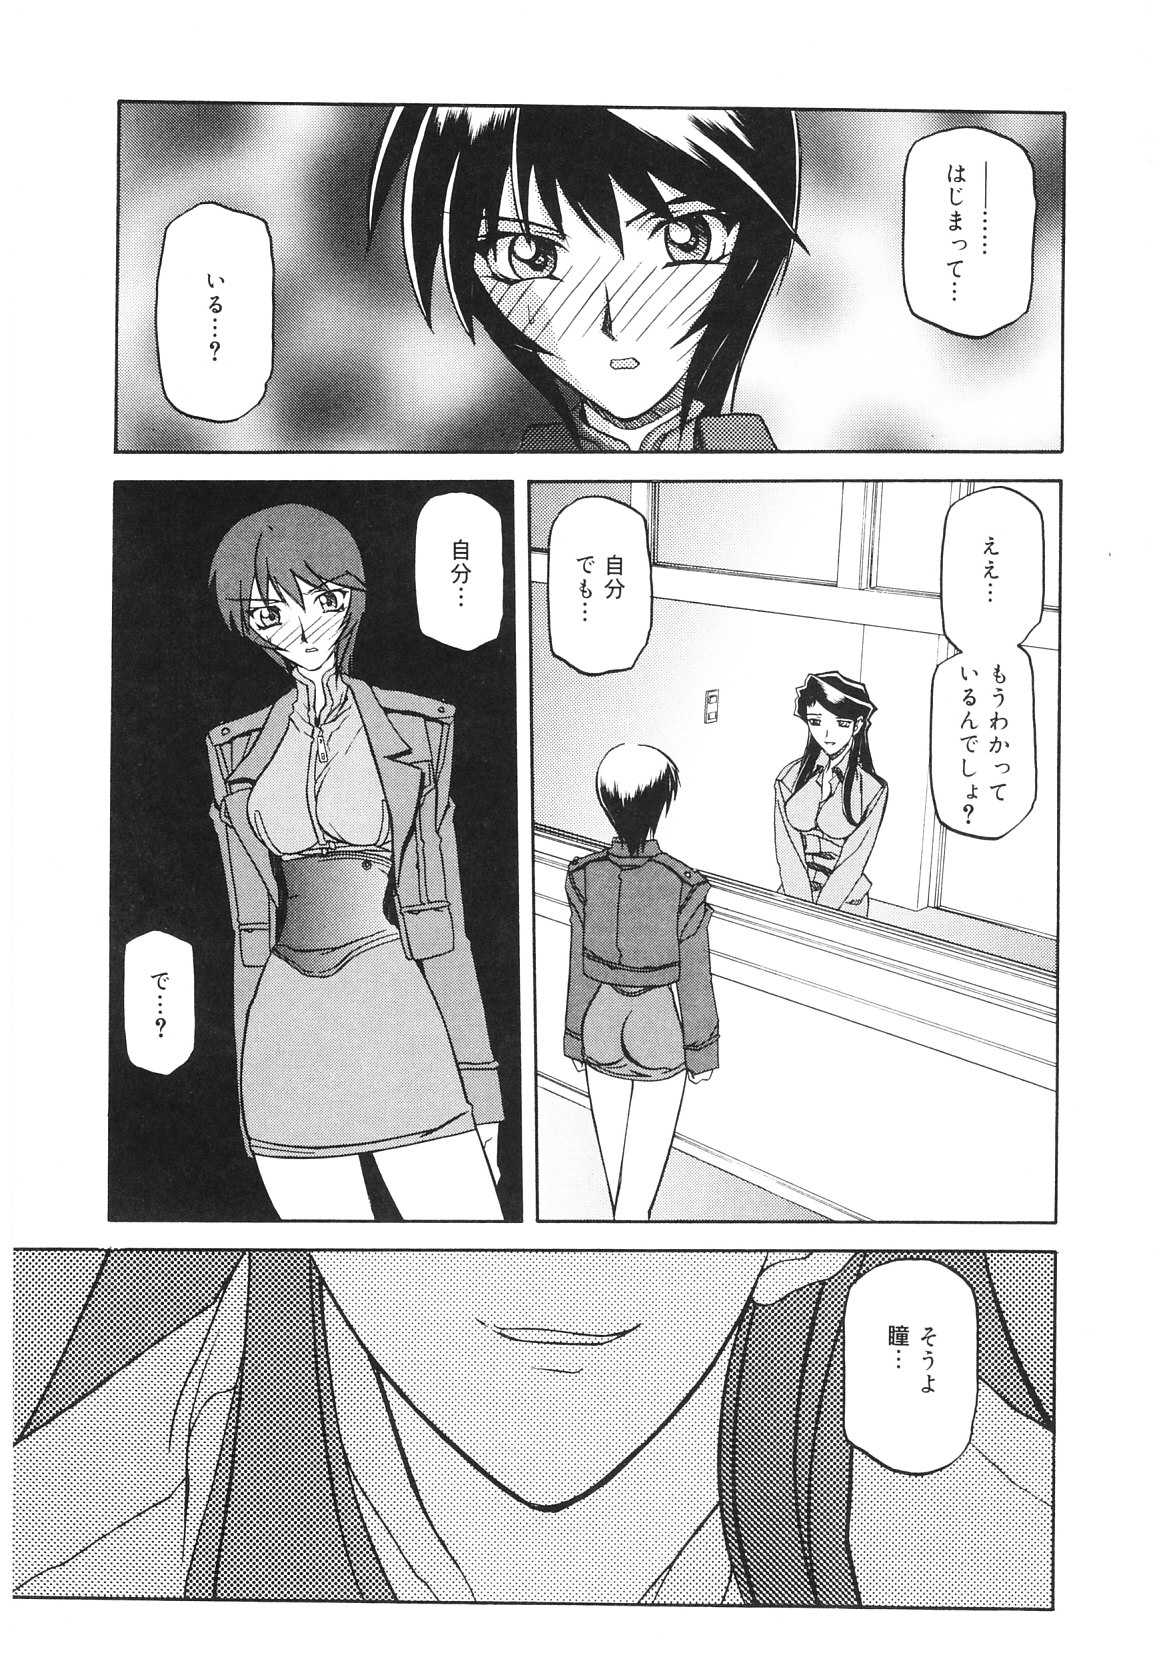 [Sanbun Kyoden] READINESS [山文京伝] READINESS